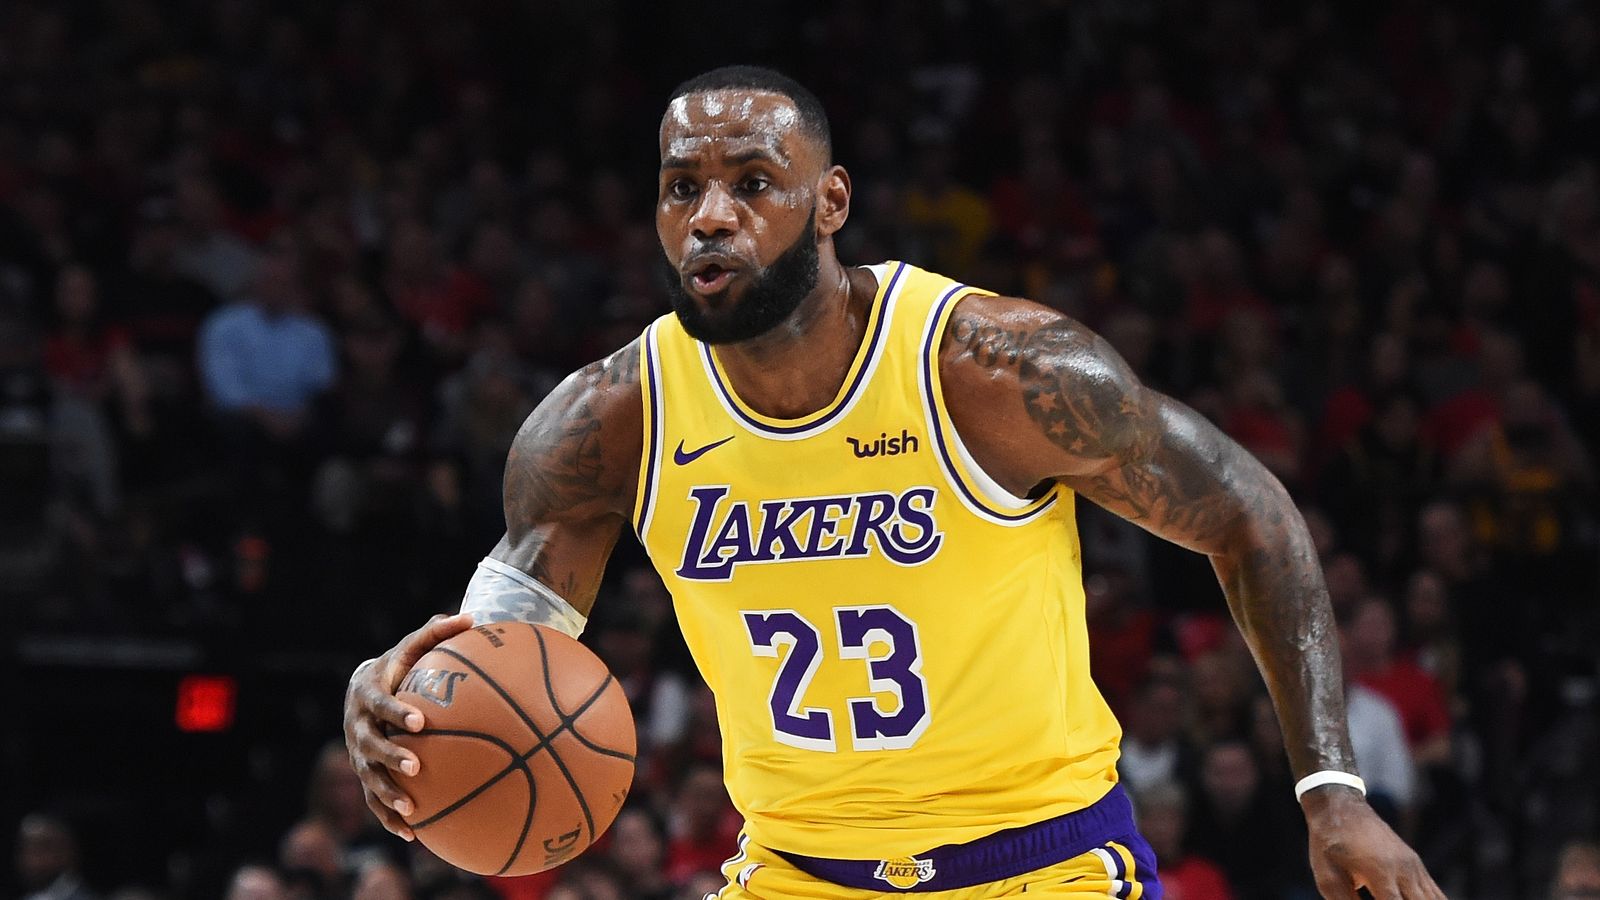 Lebron James: Basketball superstar loses in Portland in LA Lakers debut | World News ...